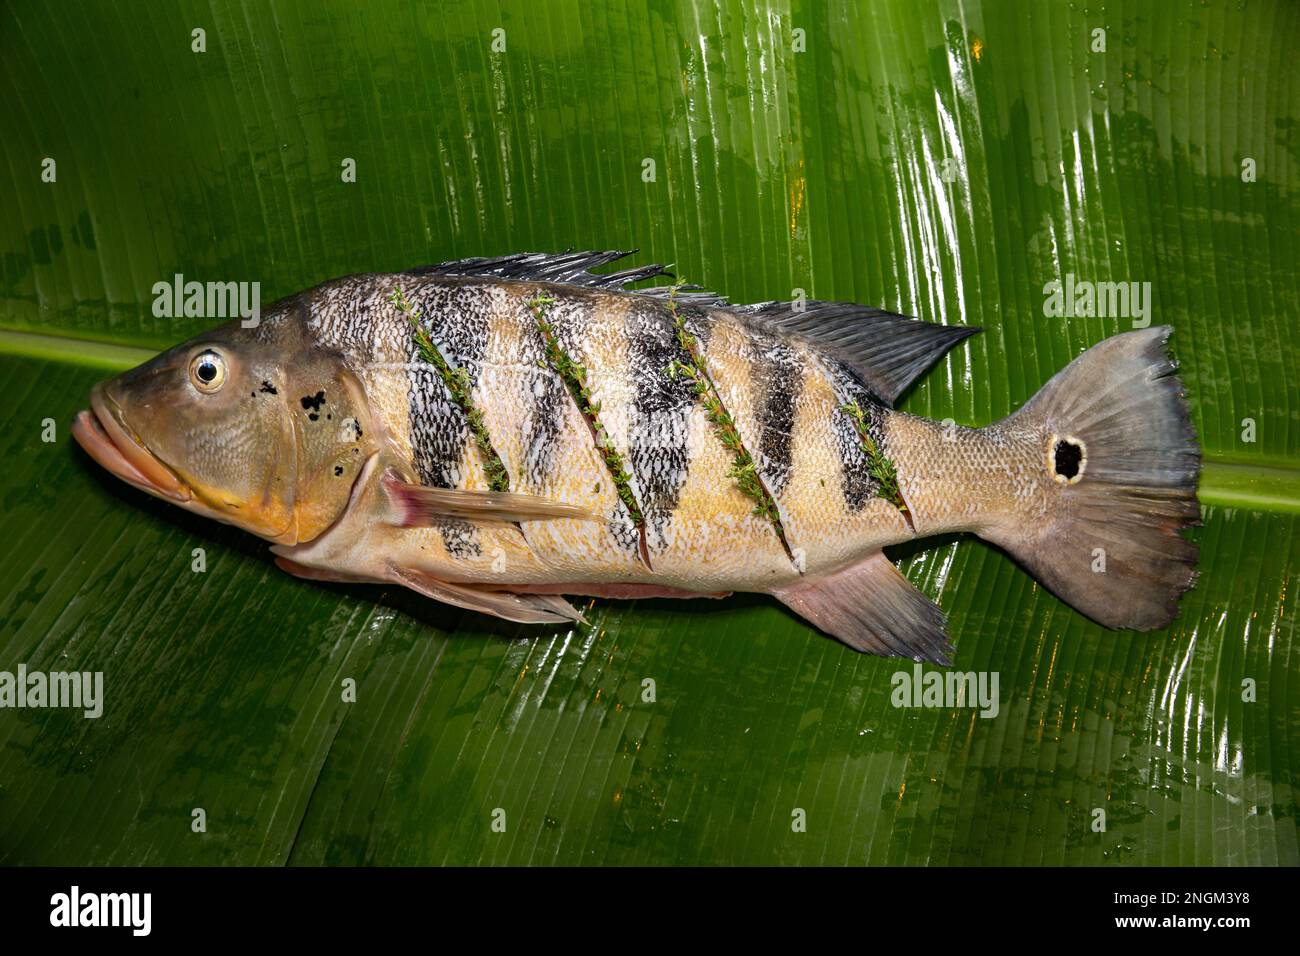 An angler admires a 20 1/2 pound peacock bass caught on a Banjo minnow lure  from a lagoon in Brazil's  River Basin Stock Photo - Alamy